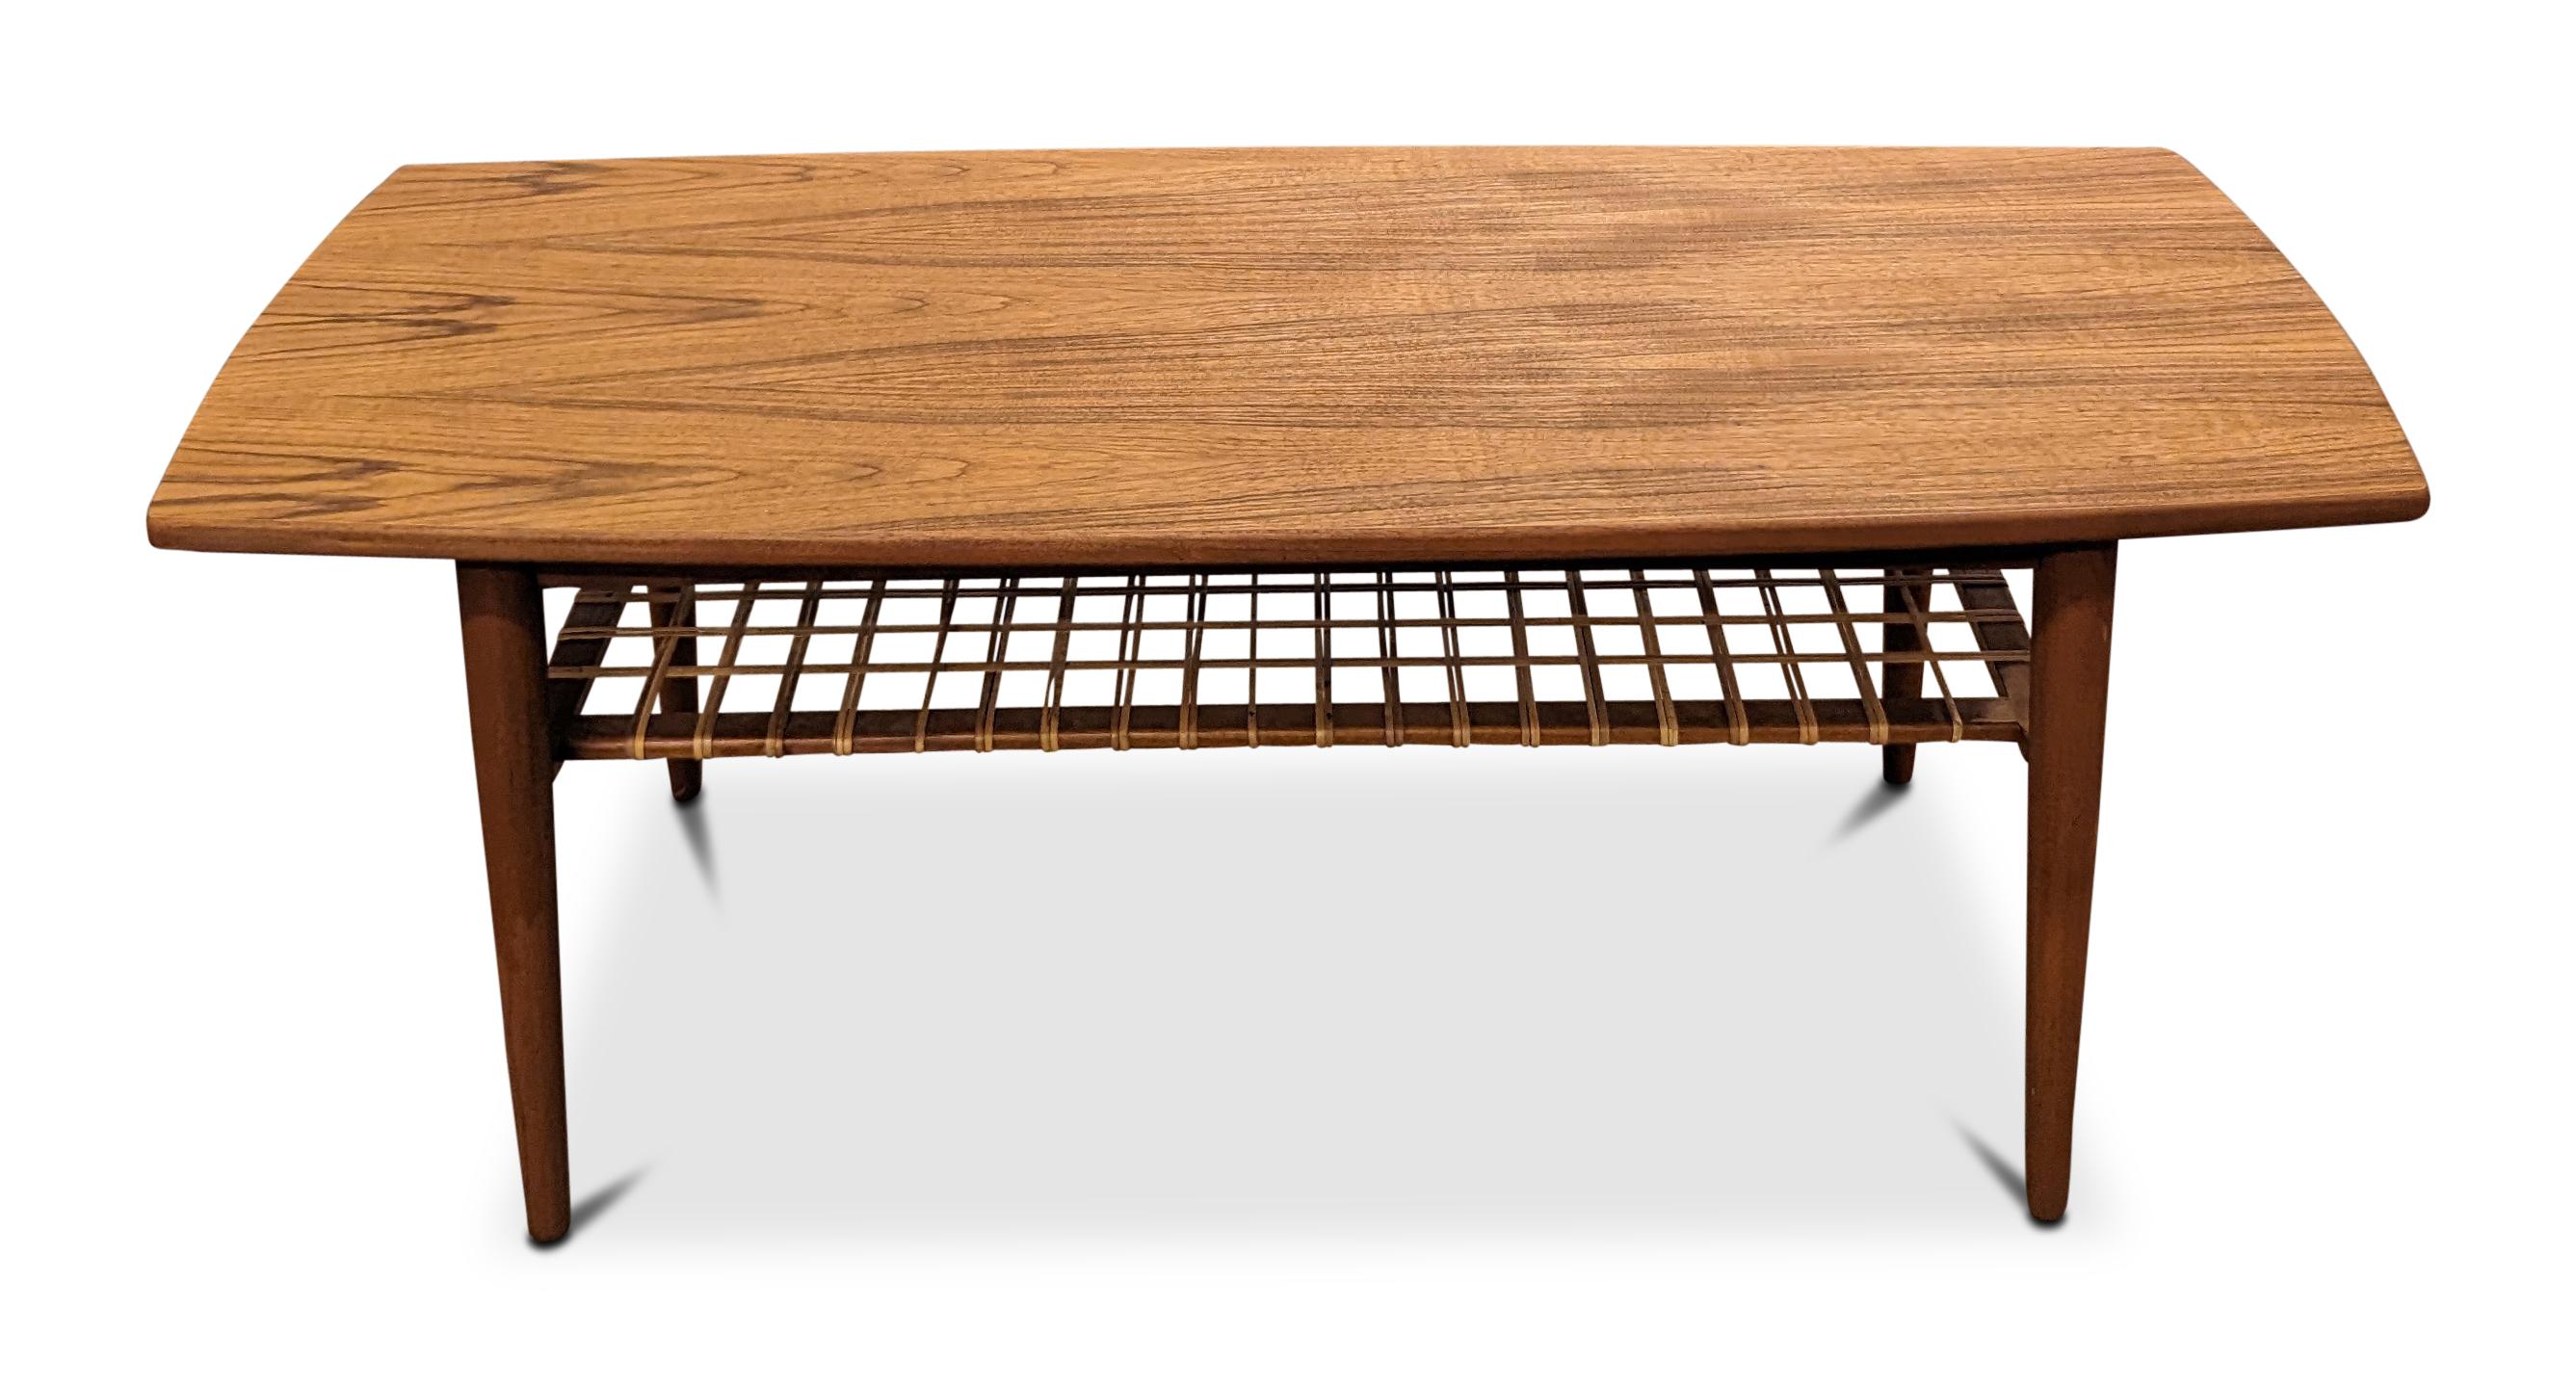 Vintage Danish Teak Coffee Table - 022402 In Good Condition For Sale In Jersey City, NJ